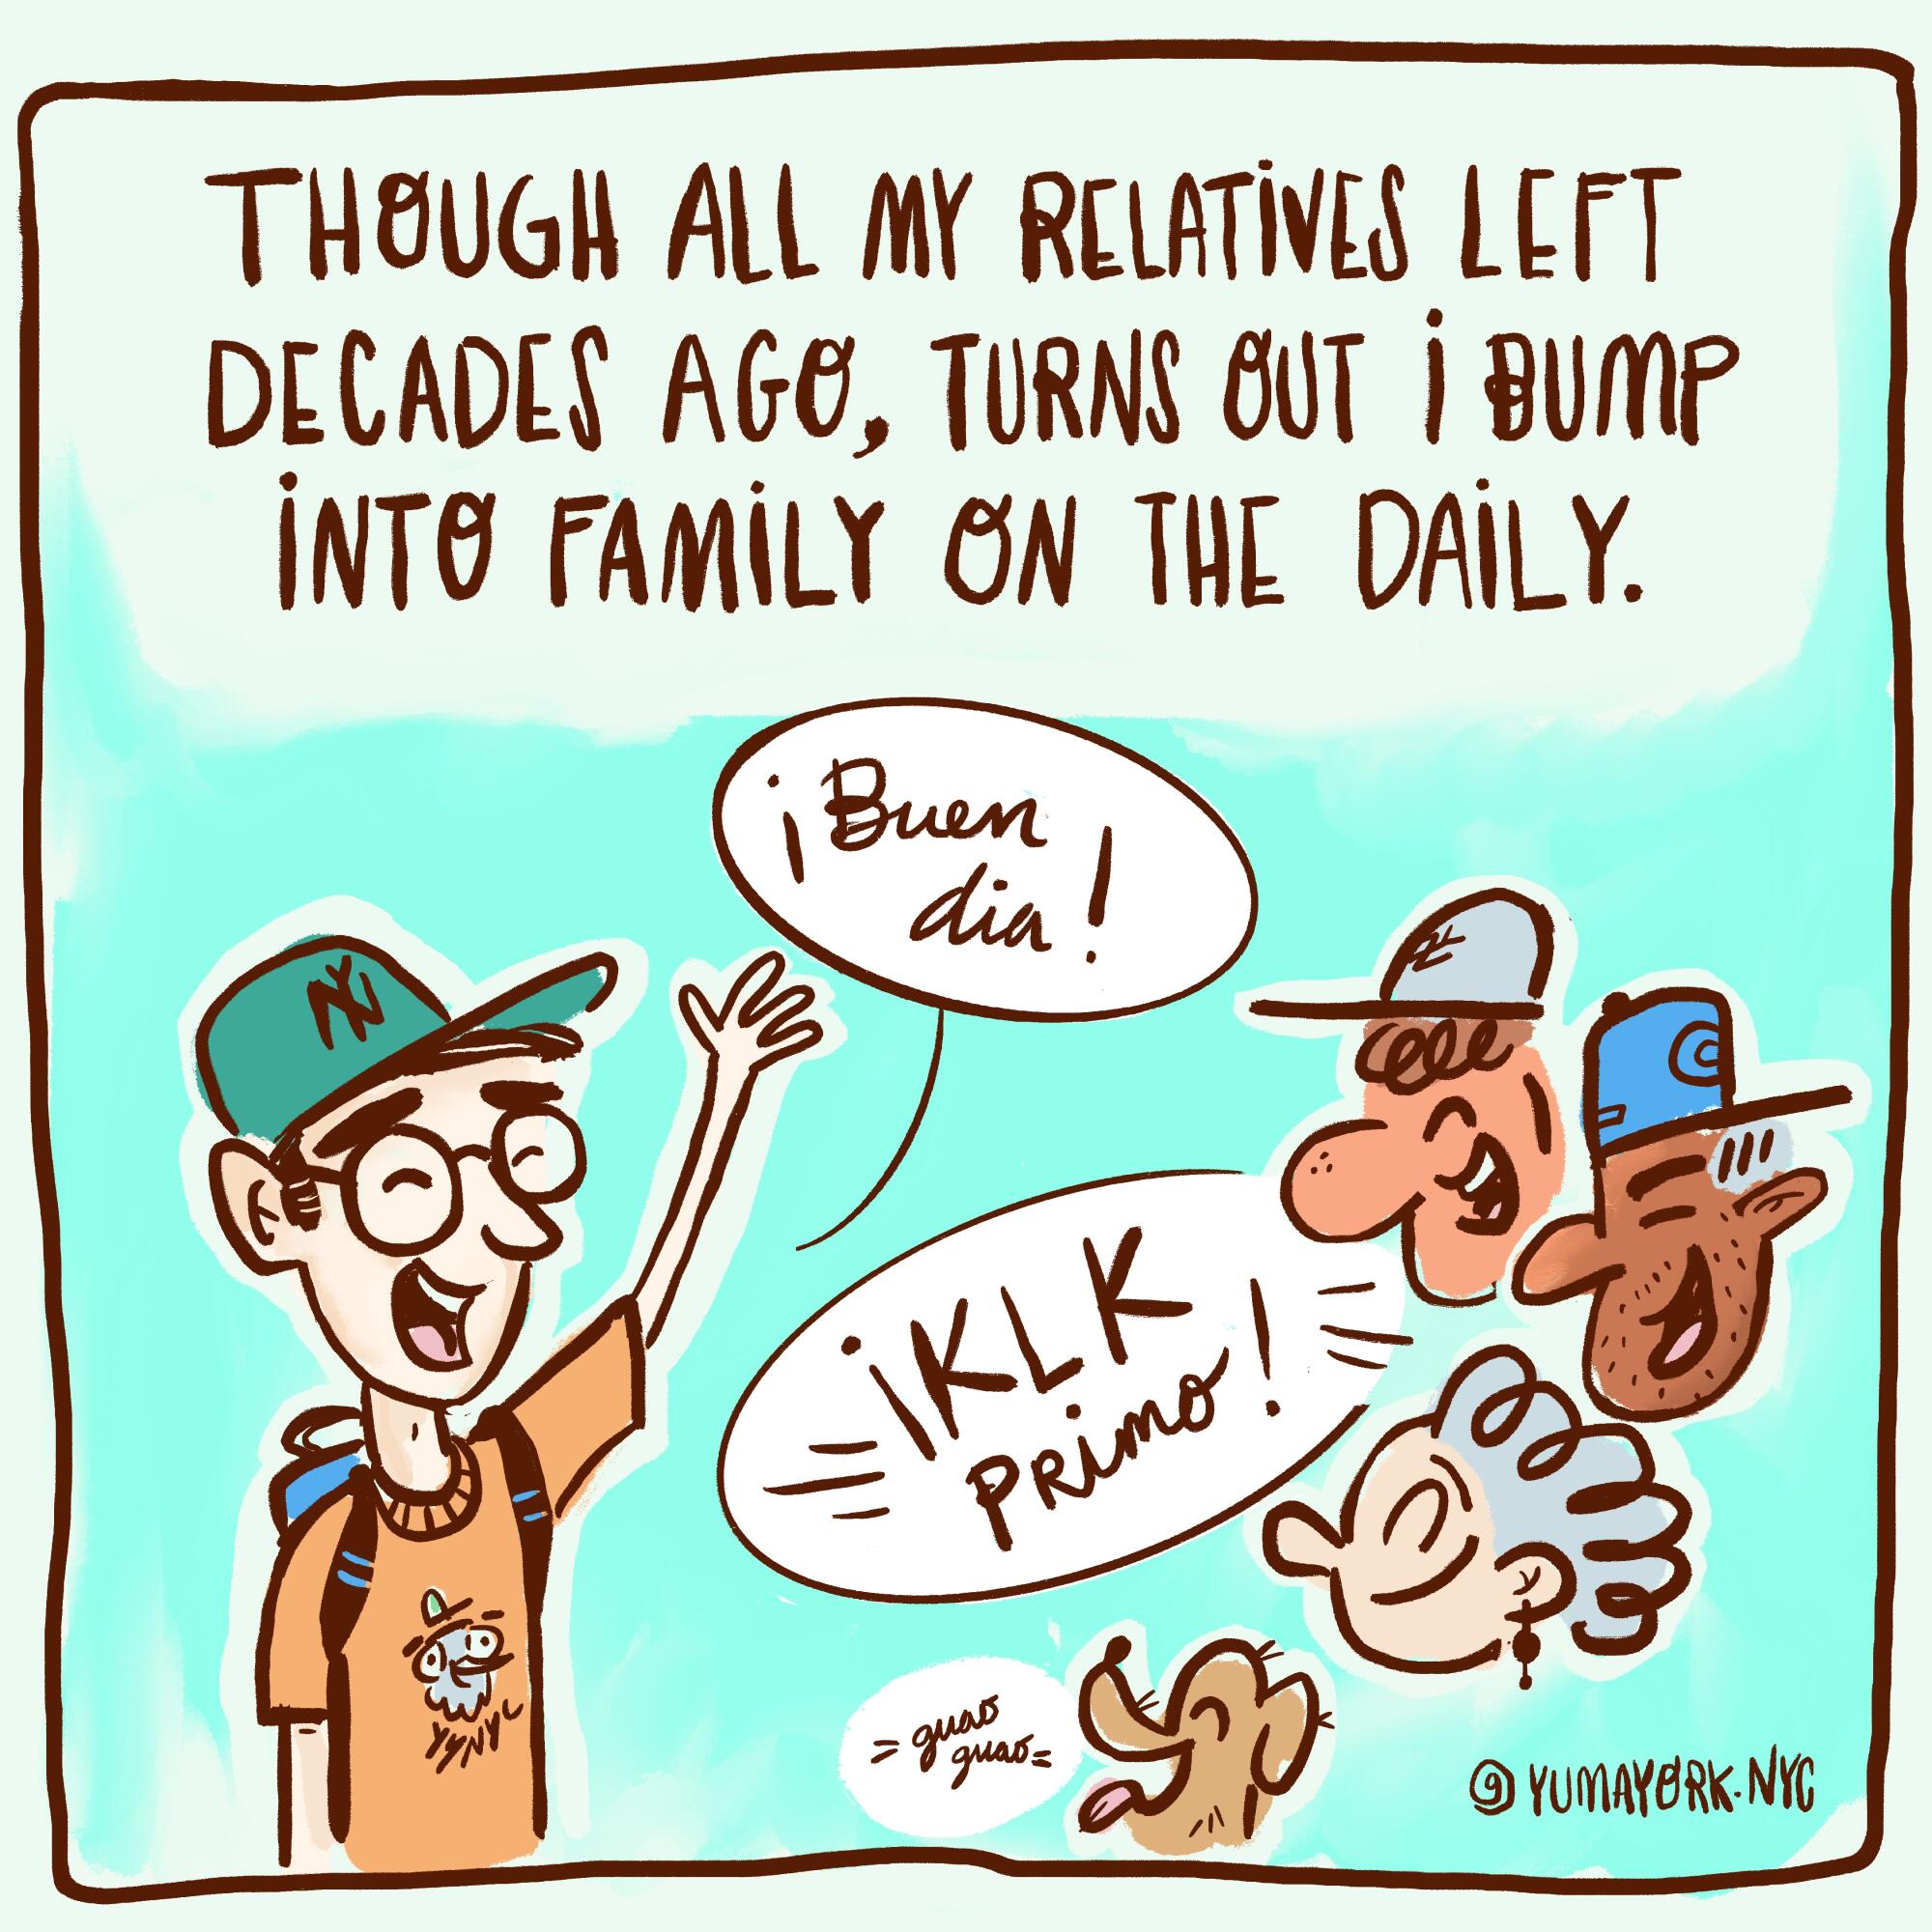 Though all my relatives left decades ago, turns out I bump into family on the daily. 